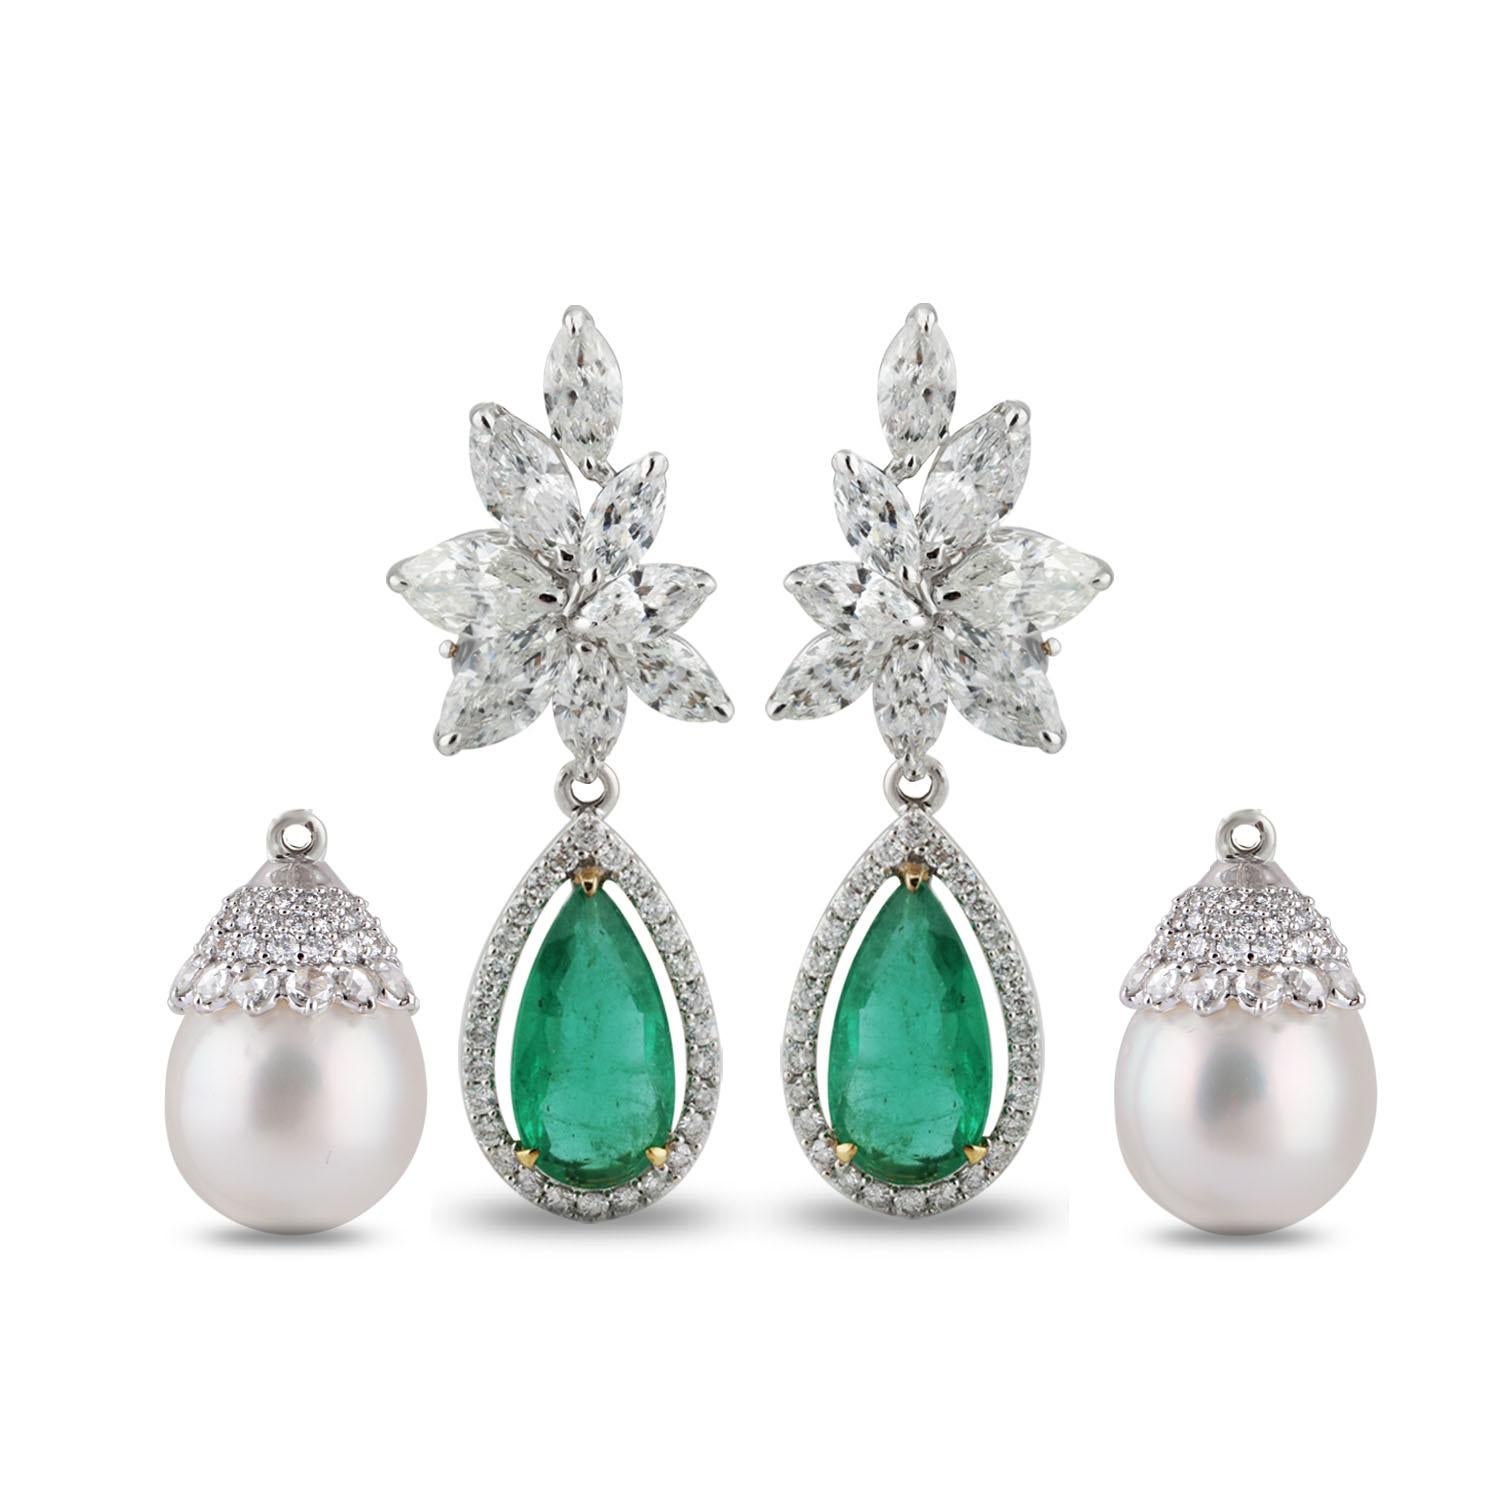 This pair of 18K white gold drop earrings featuring brilliant cut rounds and marquise diamonds and rosecut round diamonds and statement emerald danglers are the definition of old-school luxury. Adding a twist it has a changeable cap with south sea